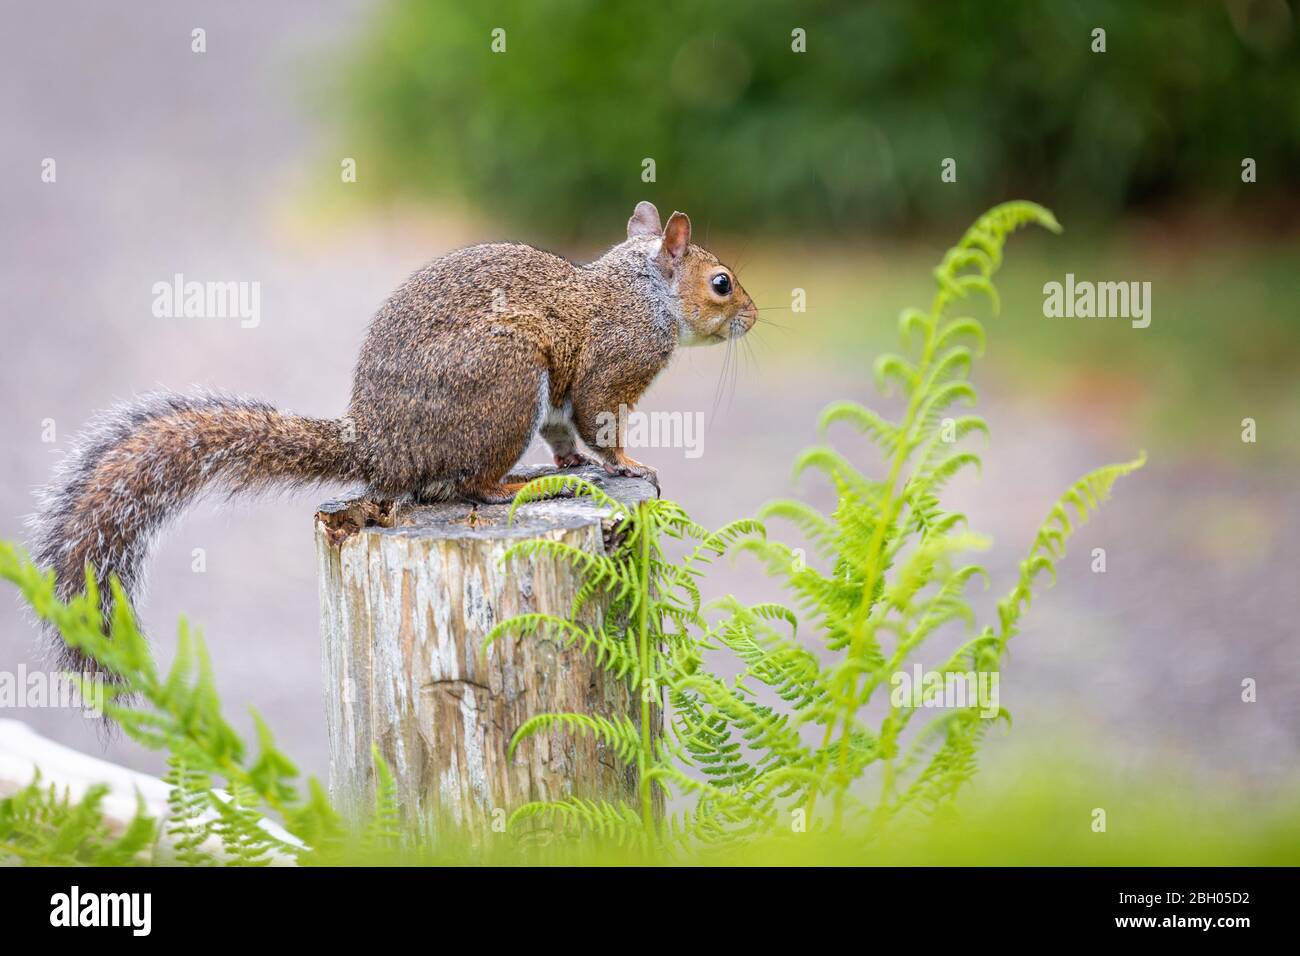 In a garden, a grey squirrel is standing on a pole ready to jump; in the foreground and in the background there are out of focus green bushes Stock Photo